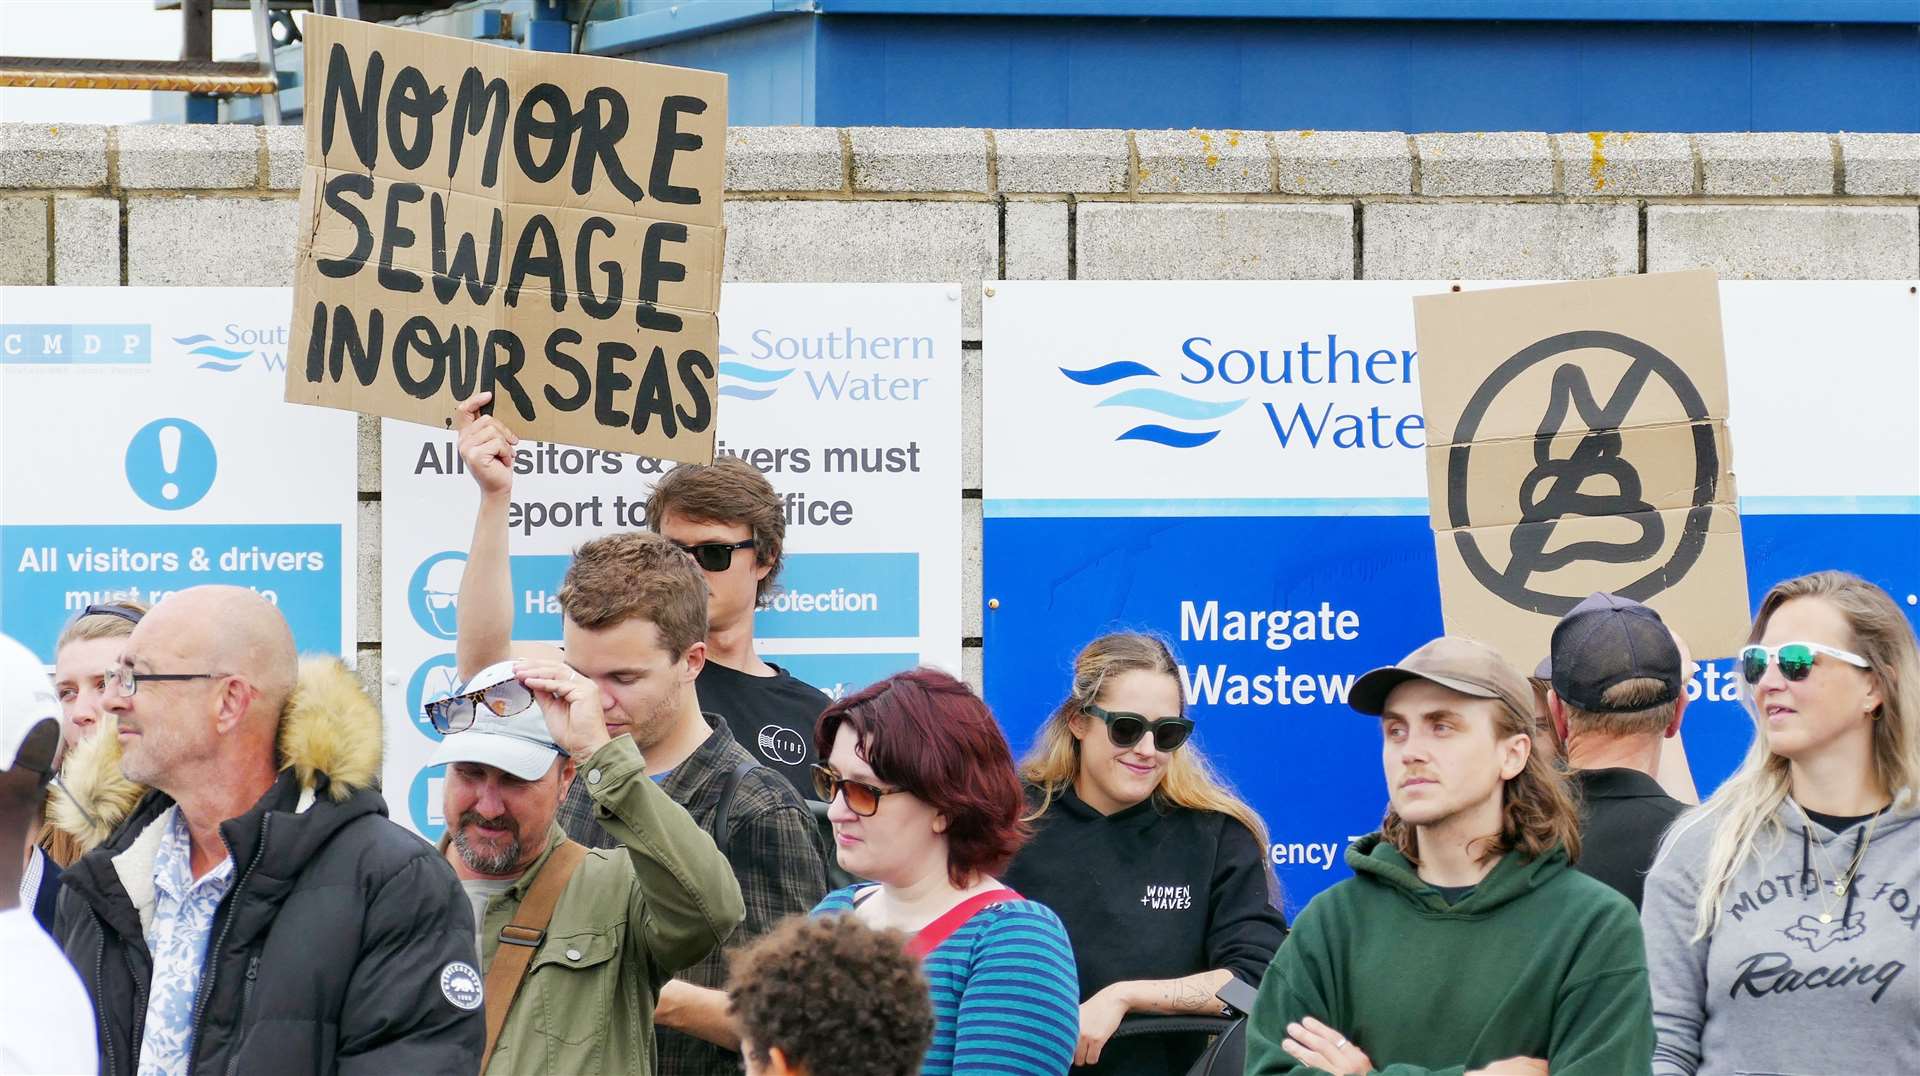 A protest against Southern Water sewage leaks in Thanet last month. Picture: Frank Leppard photography